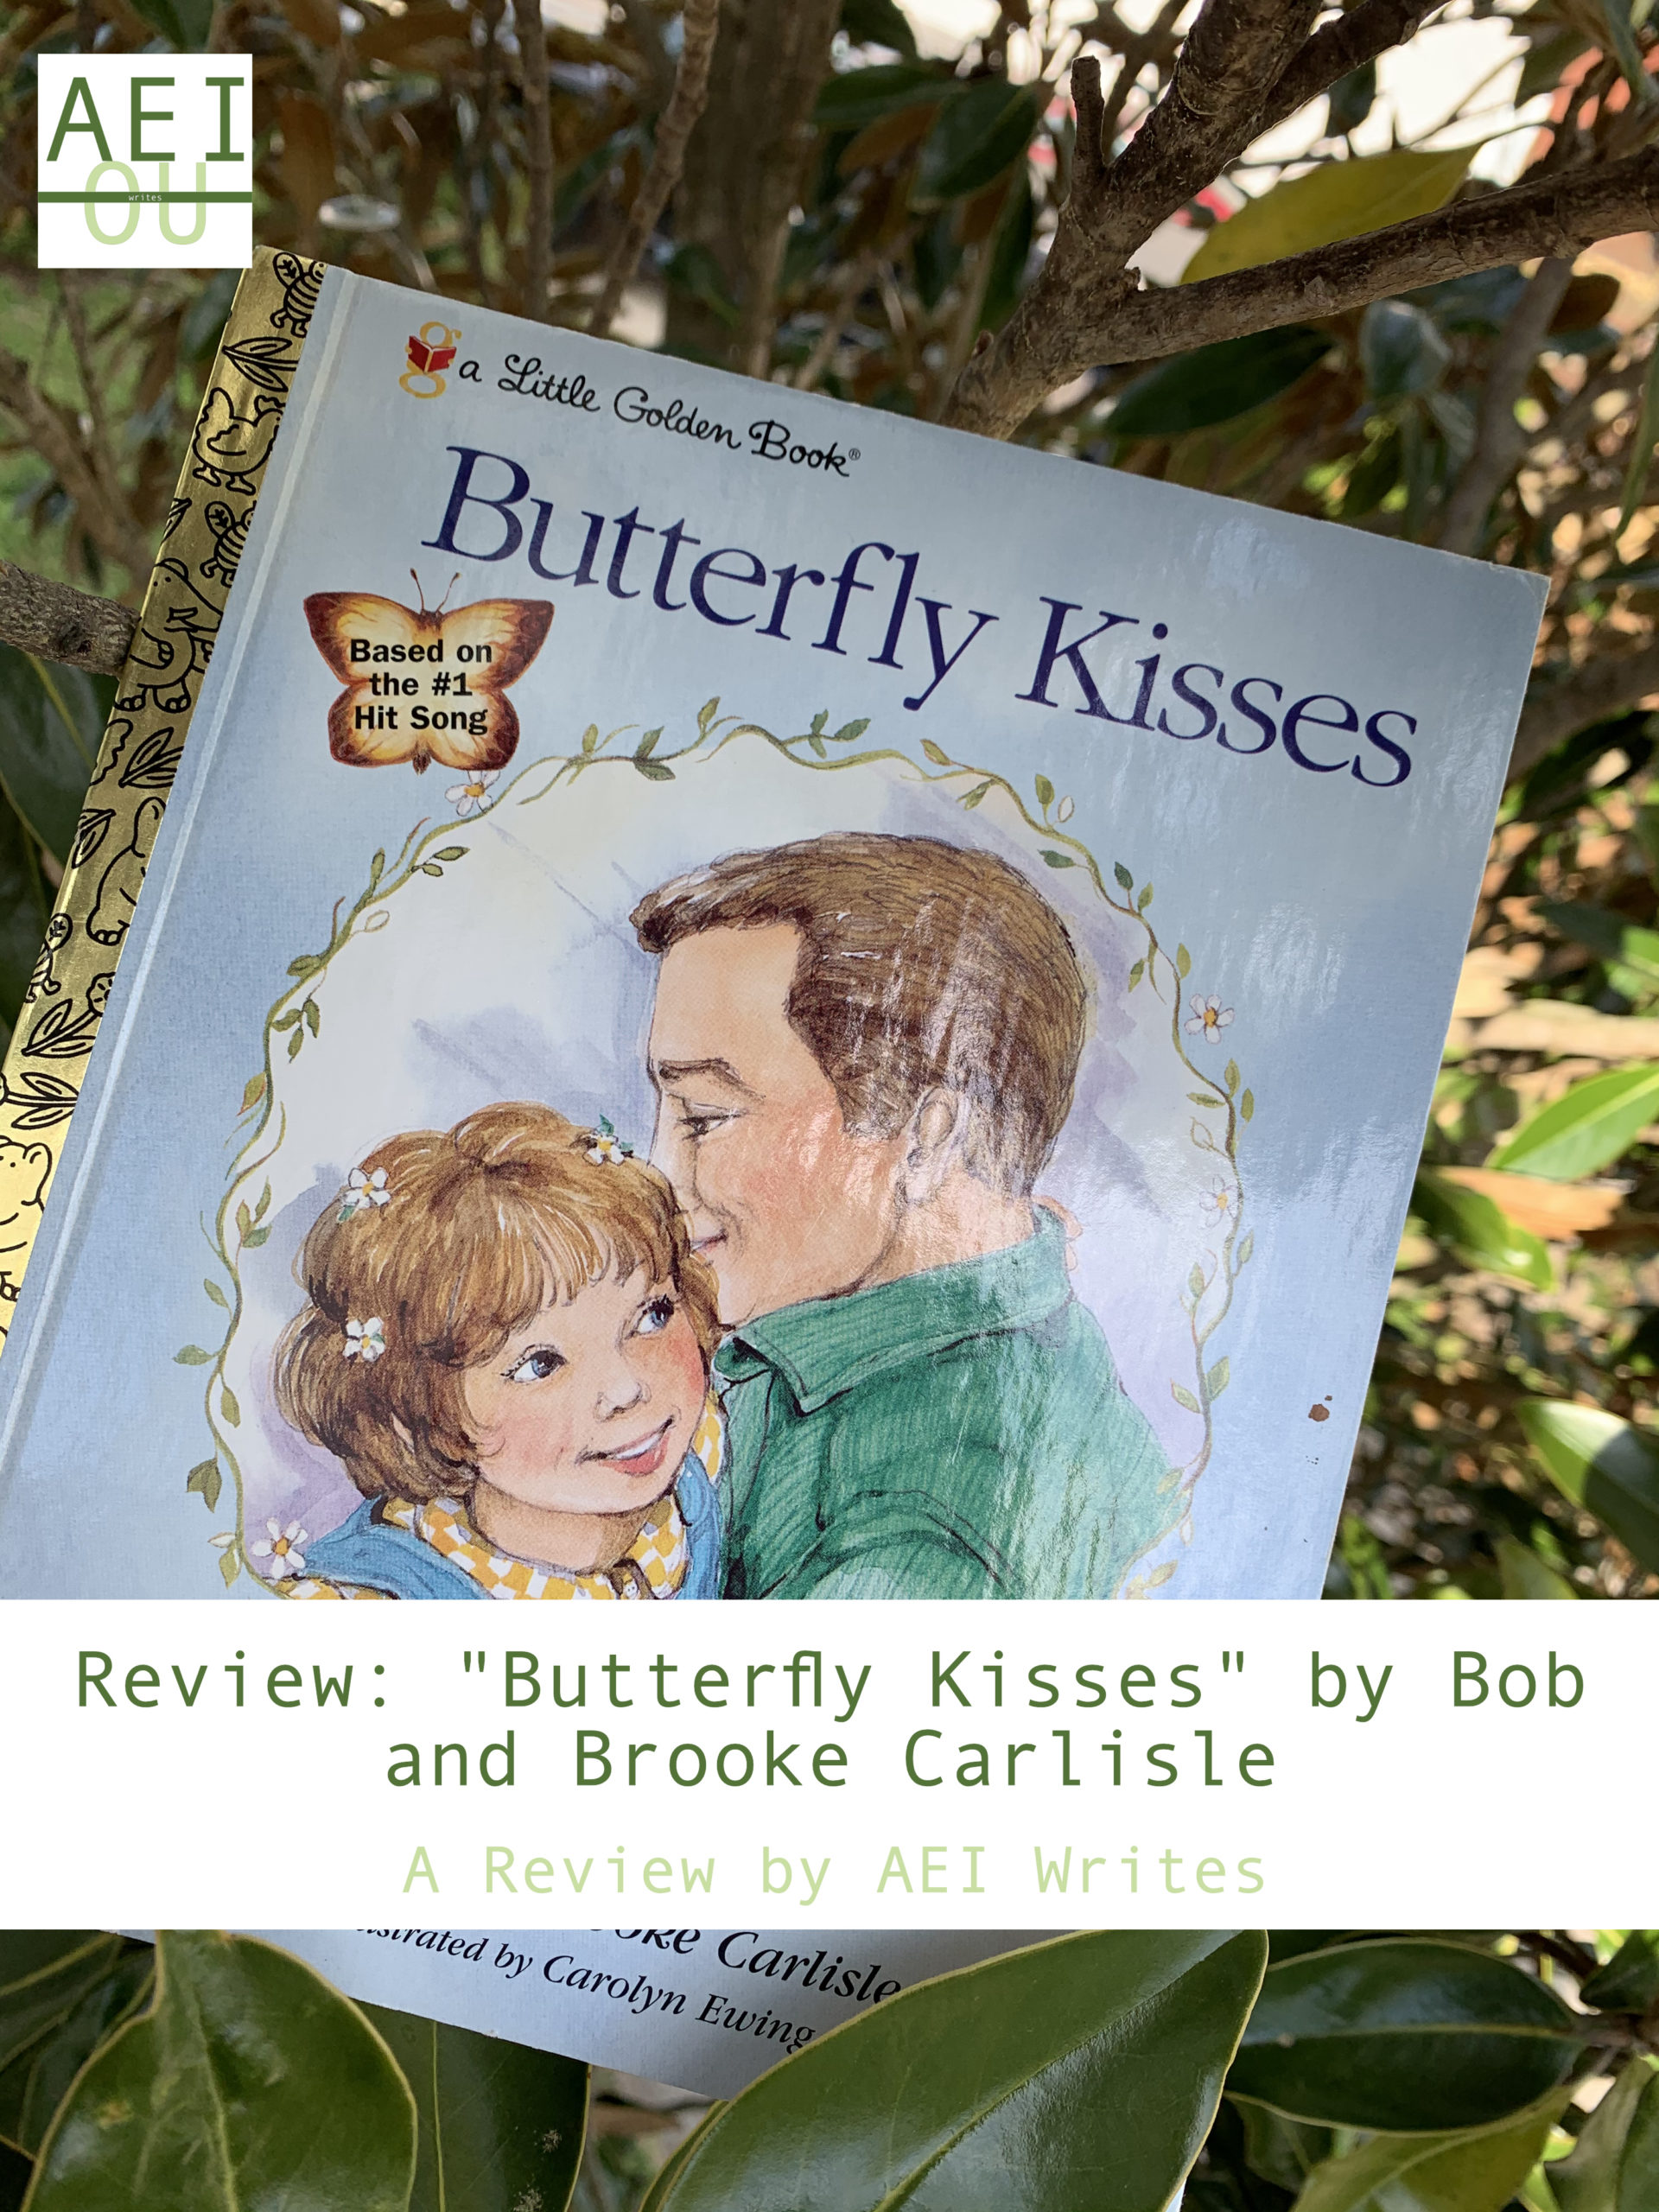 Review: “Butterfly Kisses” by Bob and Brooke Carlisle